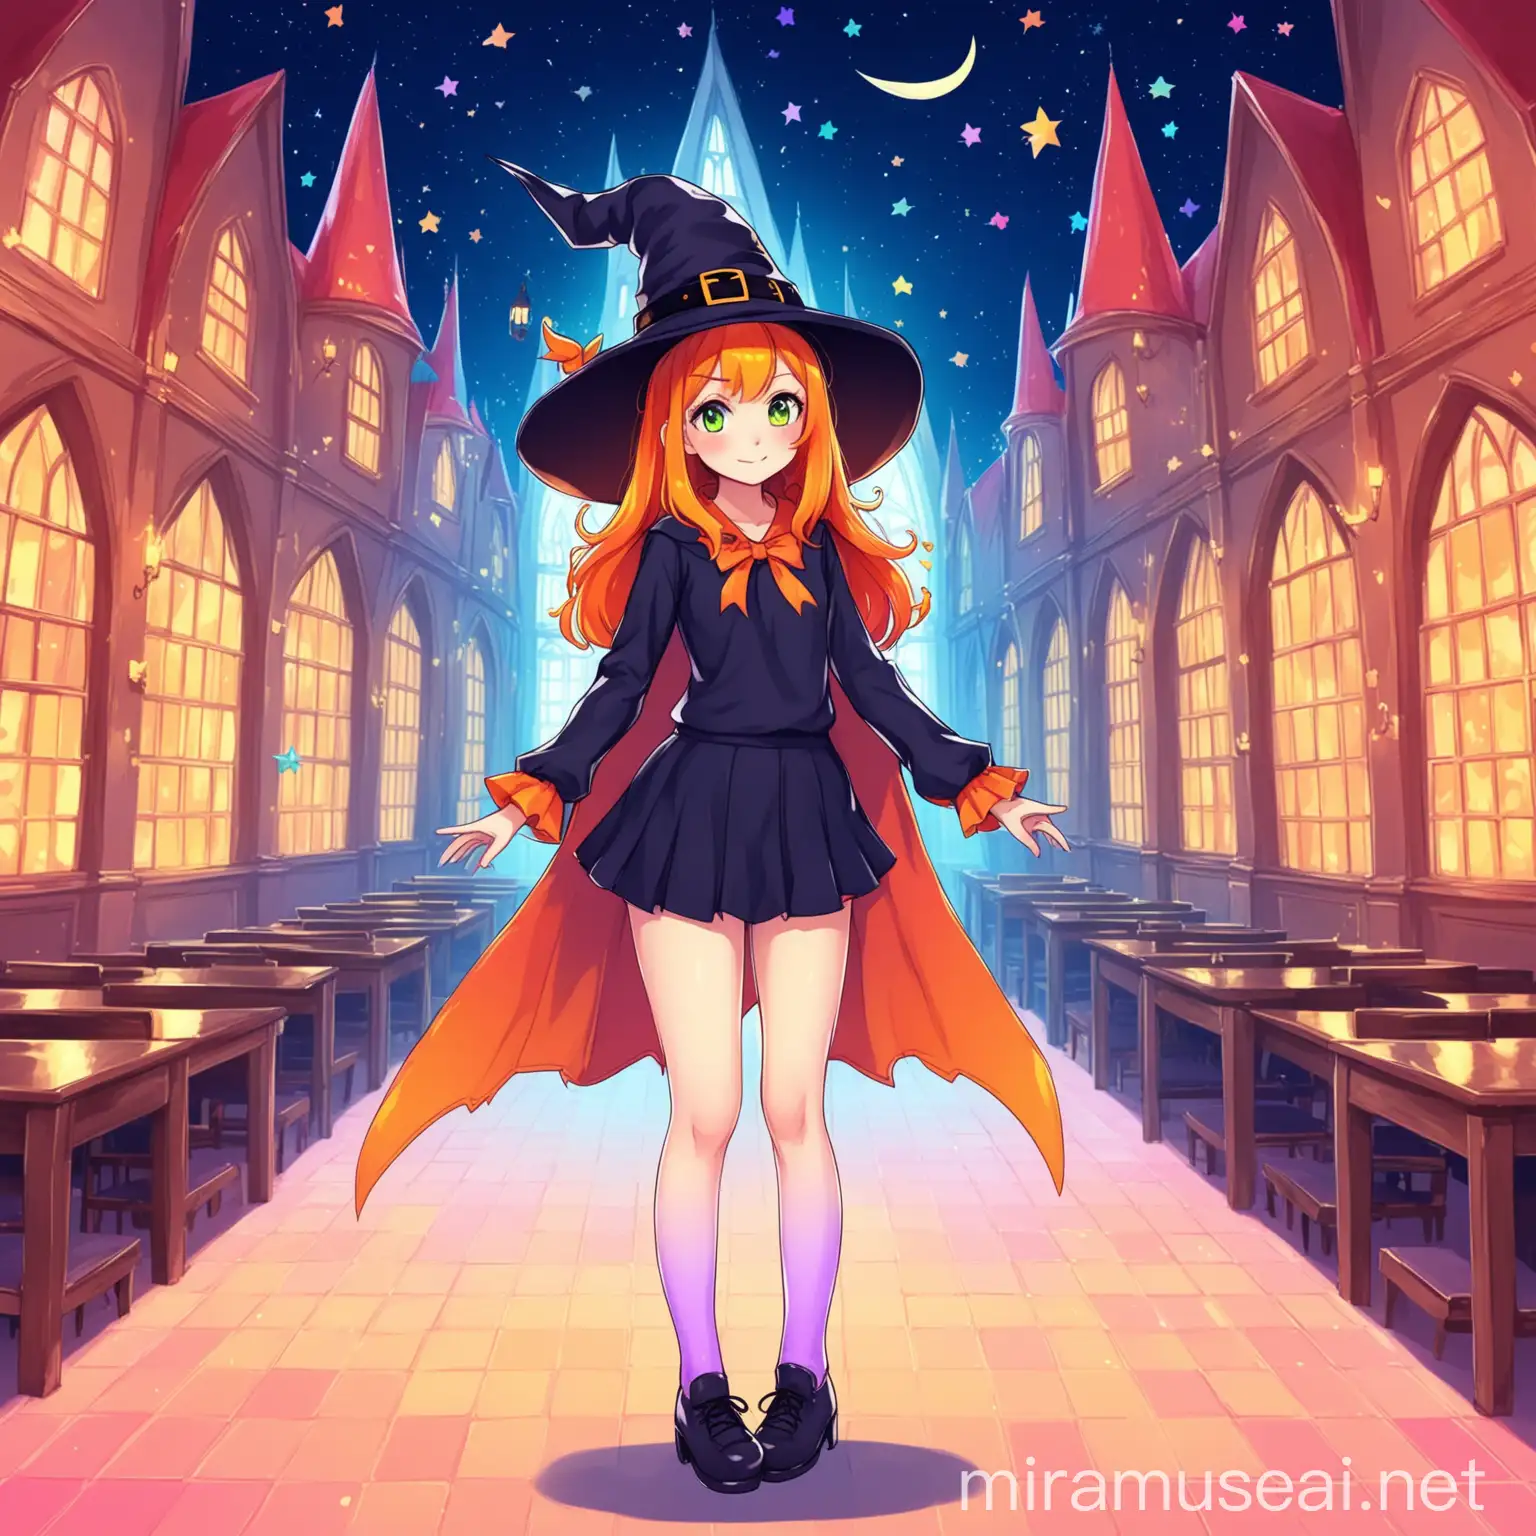 Cute Teenage Witch in Bright Academy Garb